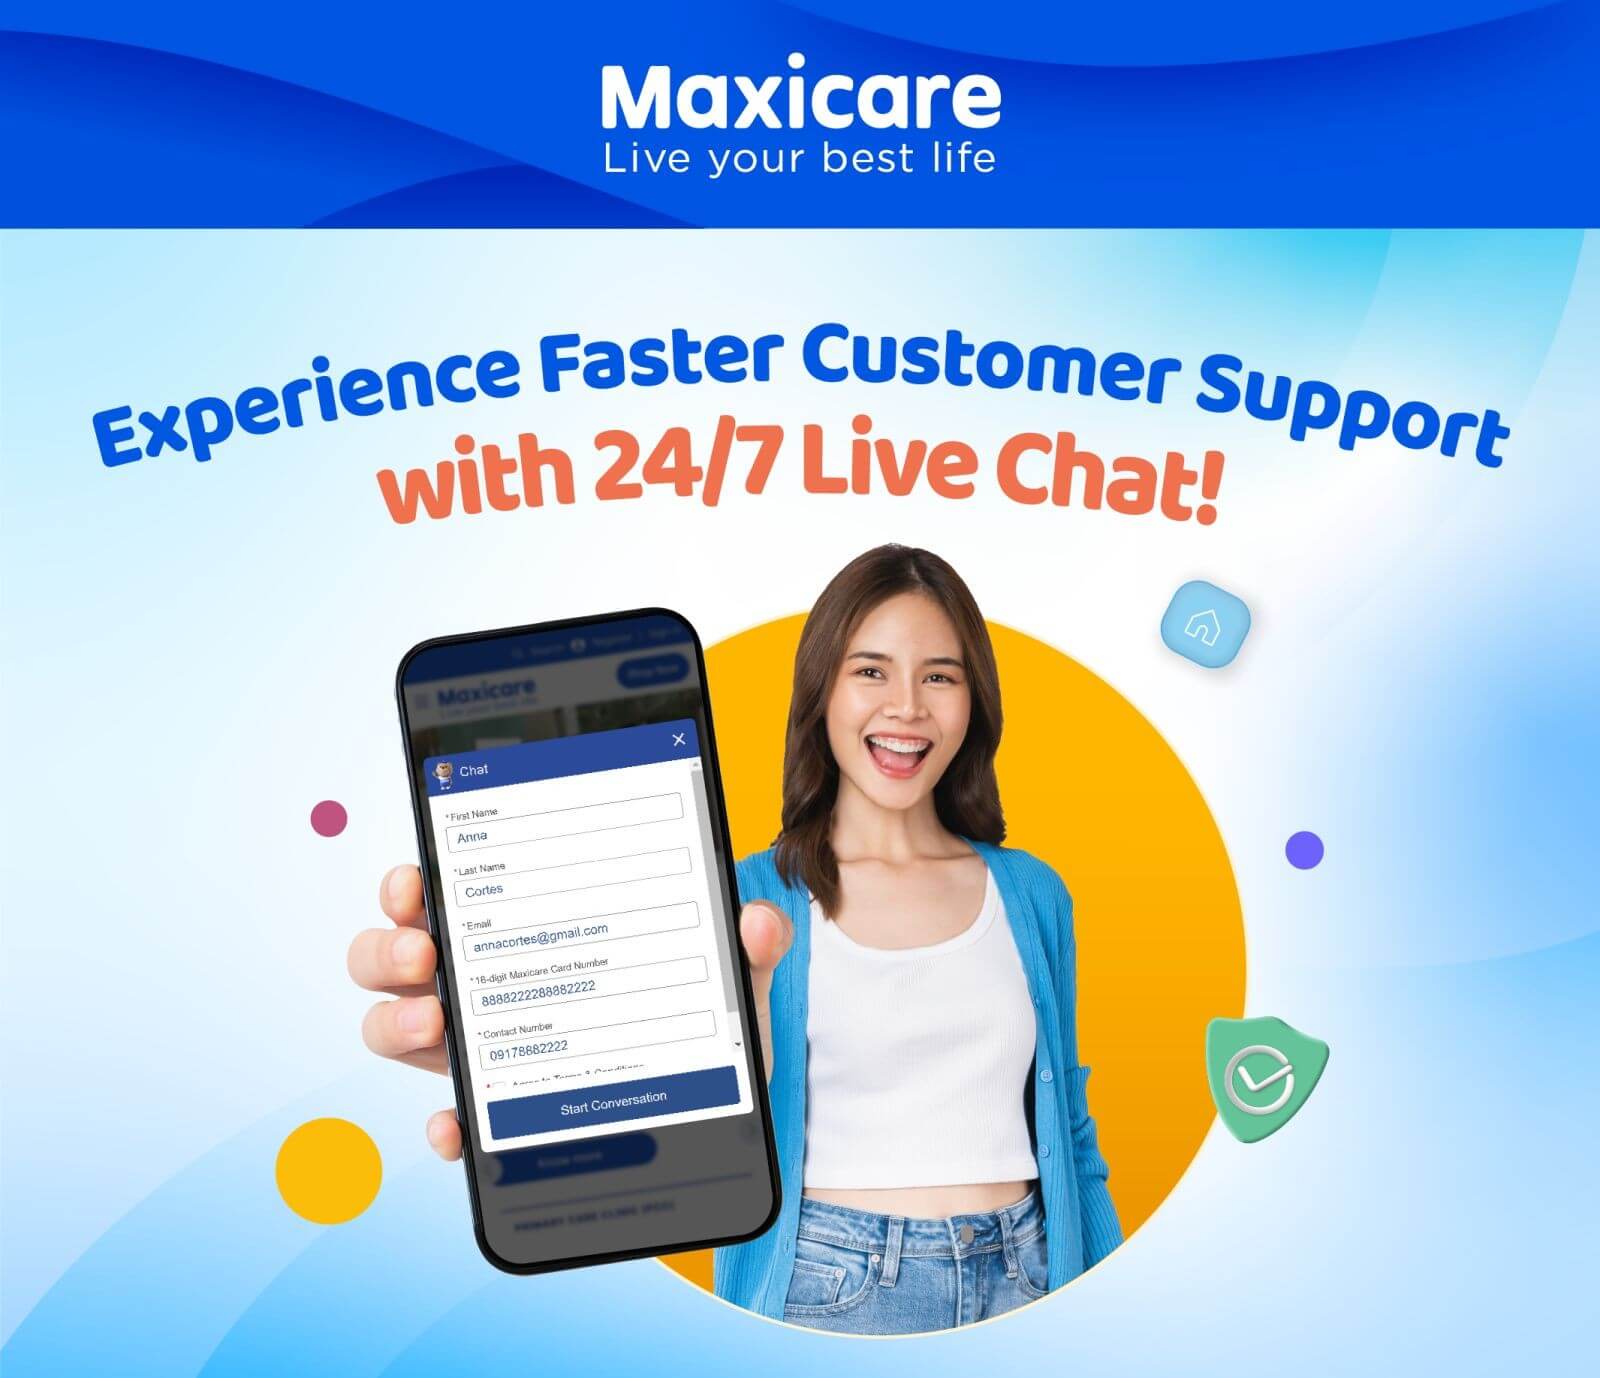 Maxicare Launches 24/7 Live Chat Service